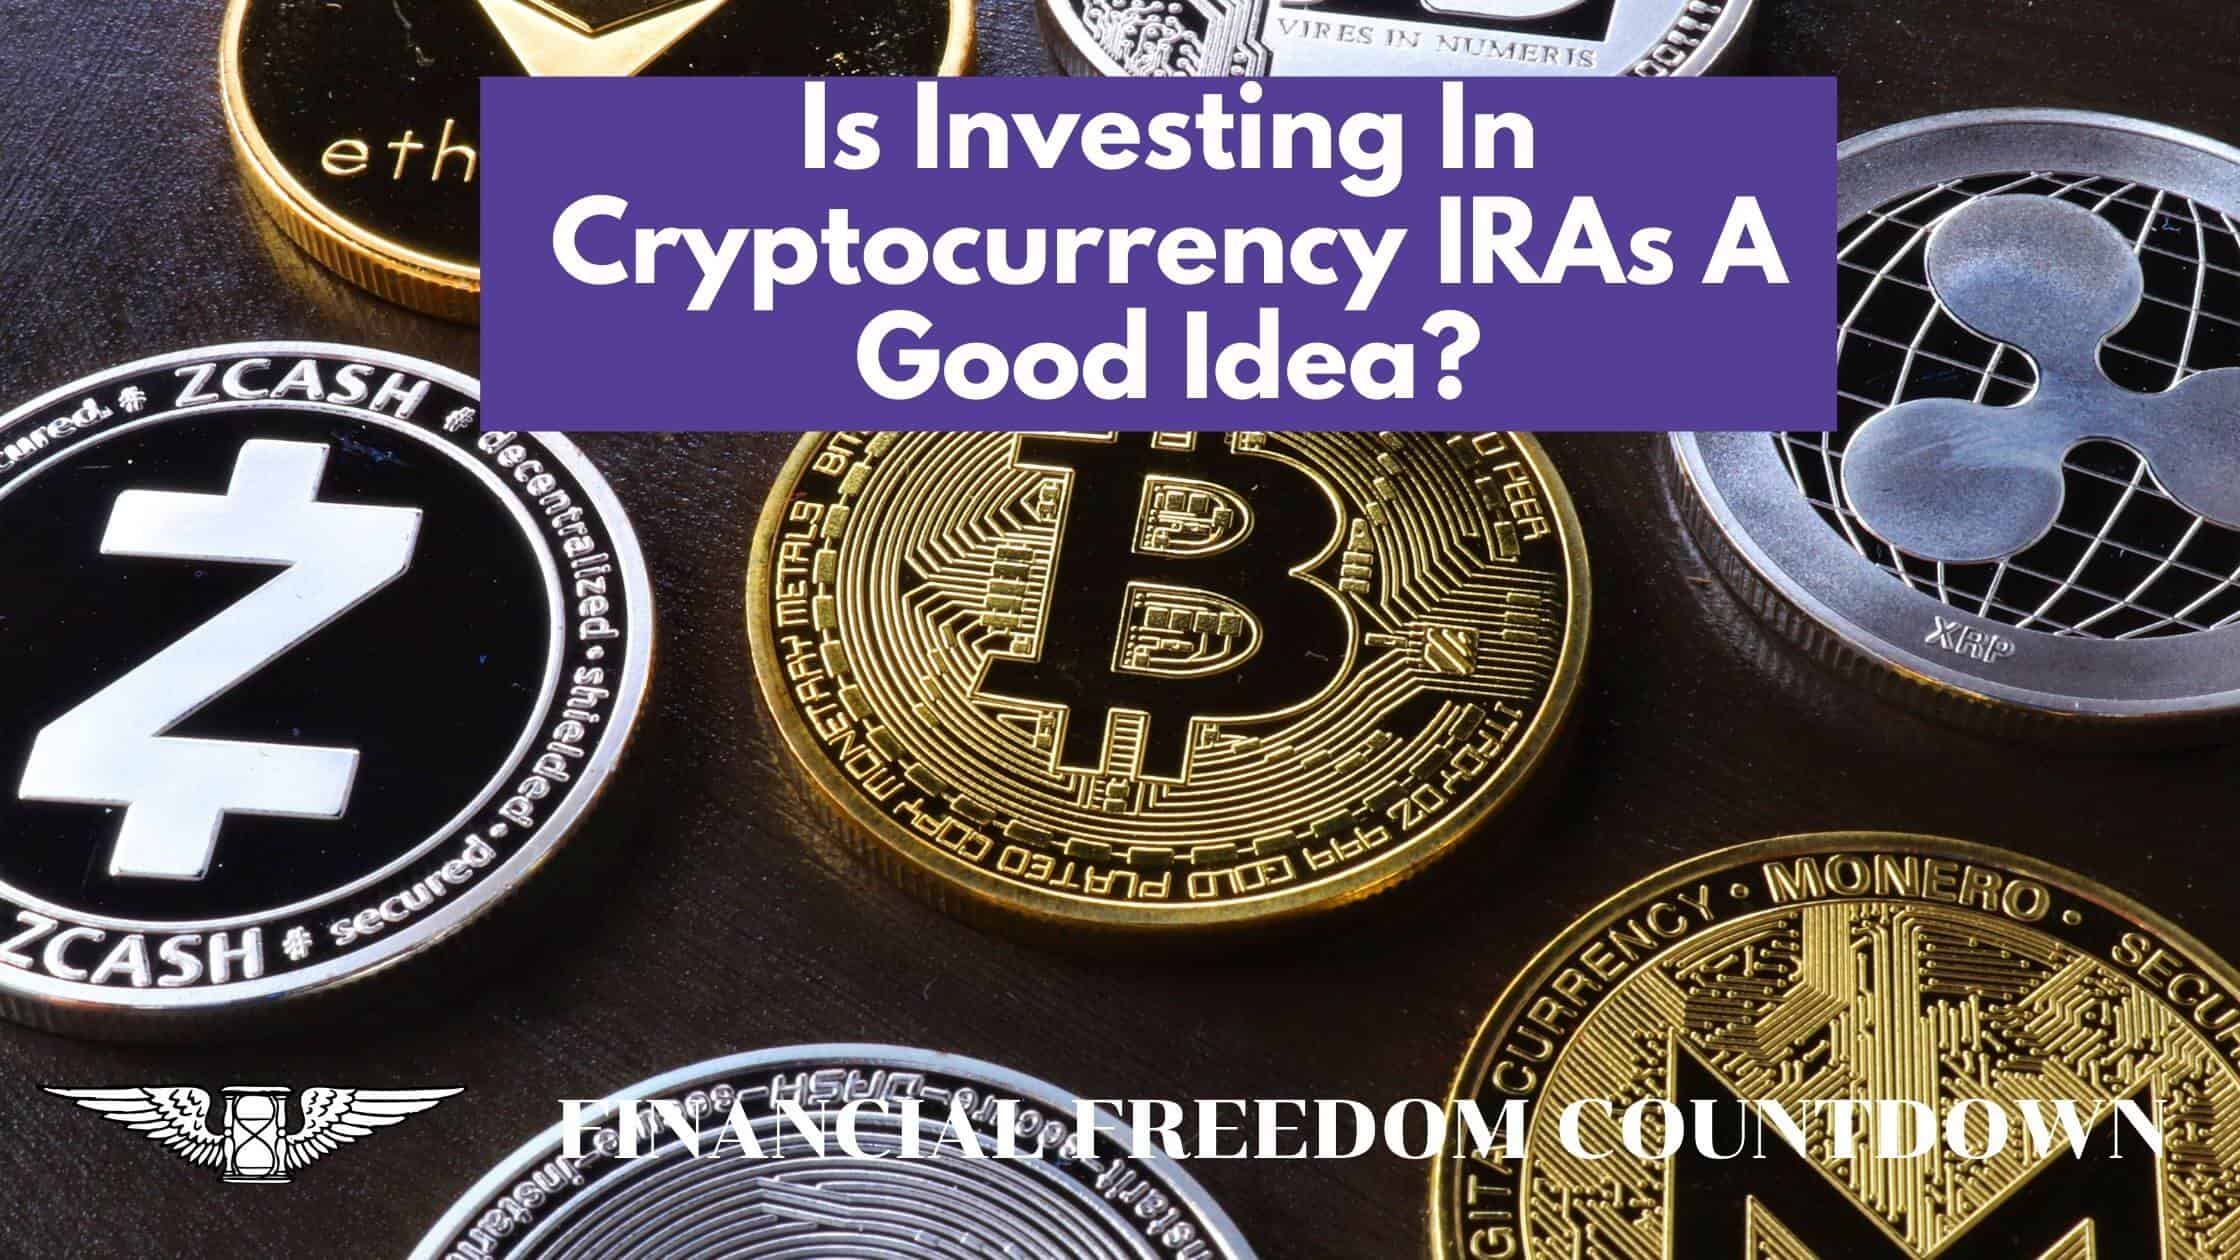 Invest in Bitcoin IRA - Self-Directed, Tax Free Cryptocurrency Investment | BitIRA®